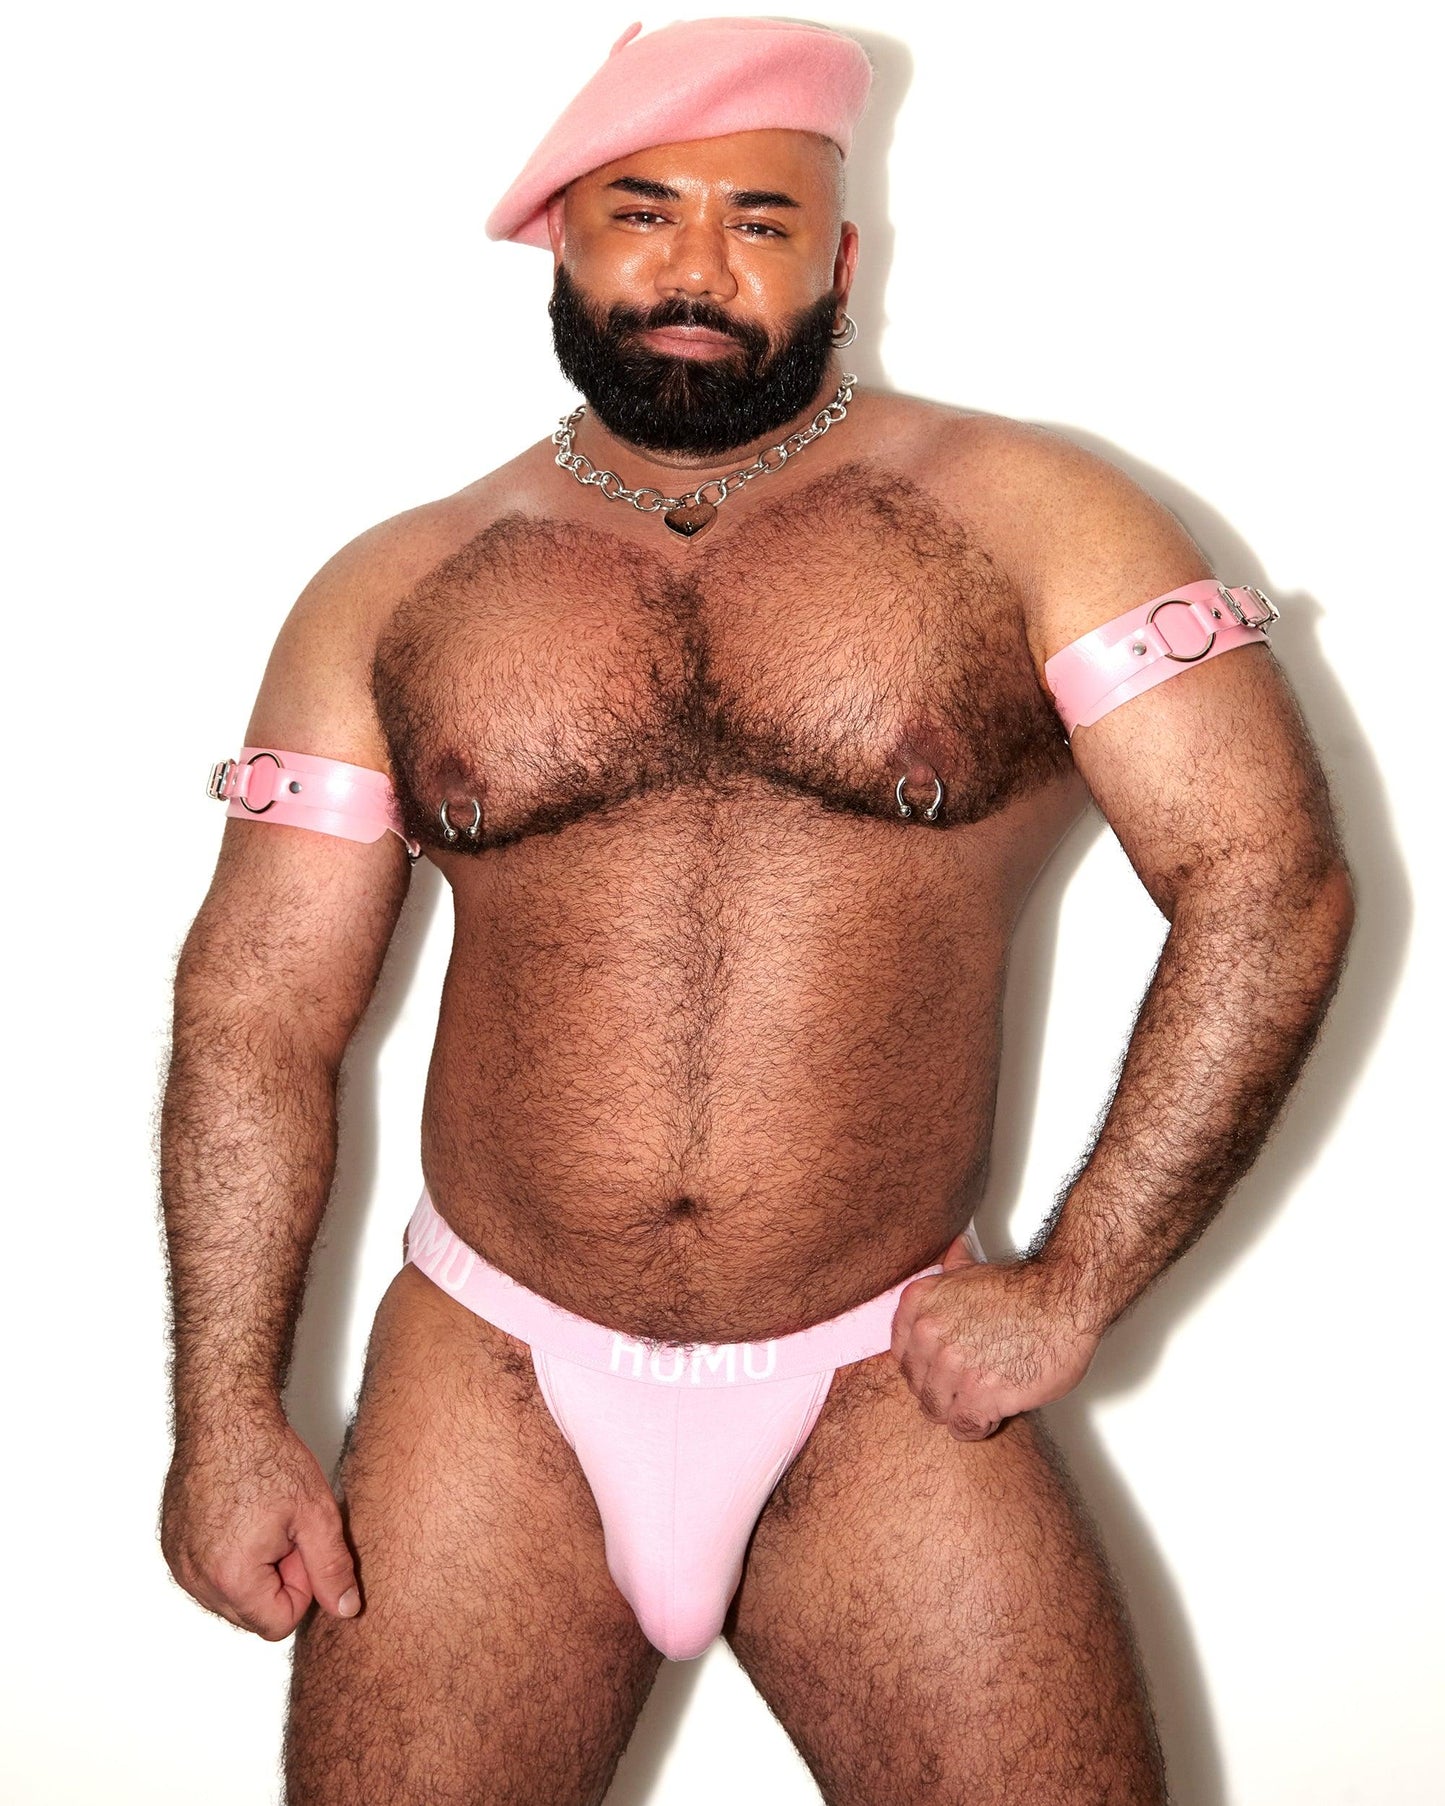 HOMO beret - pink | One size fits all.